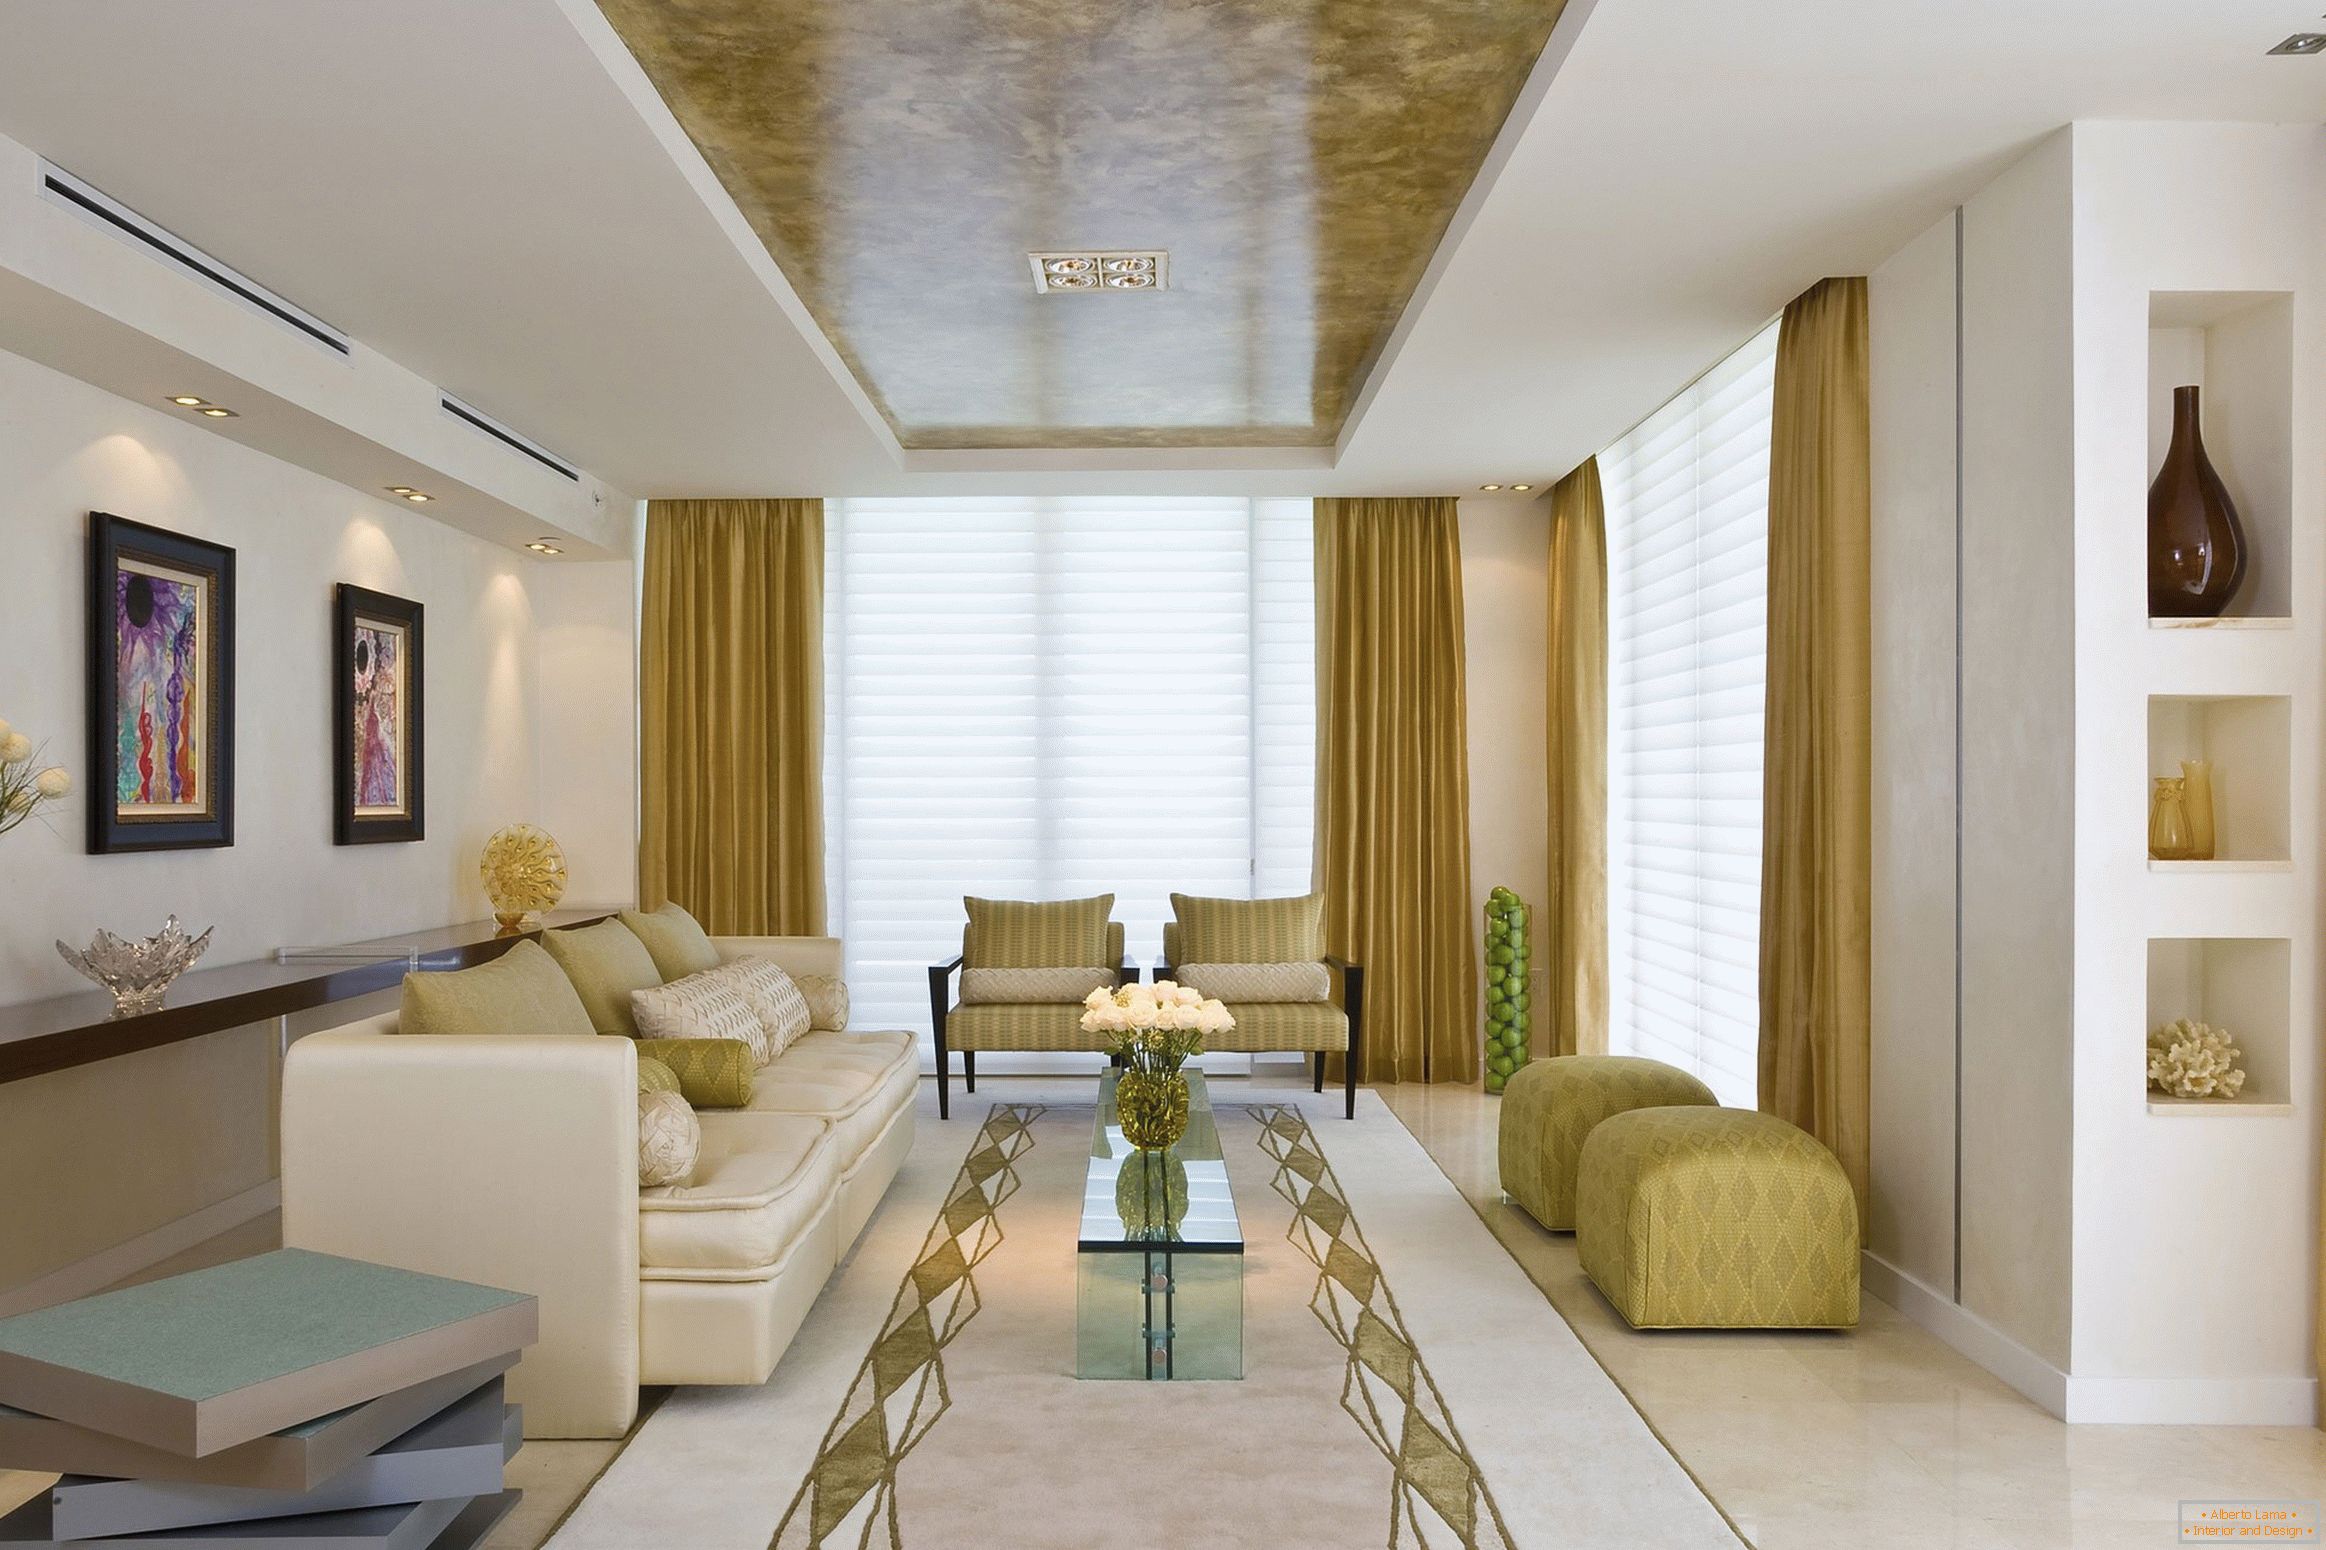 The combination of gold and white in the interior of the living room